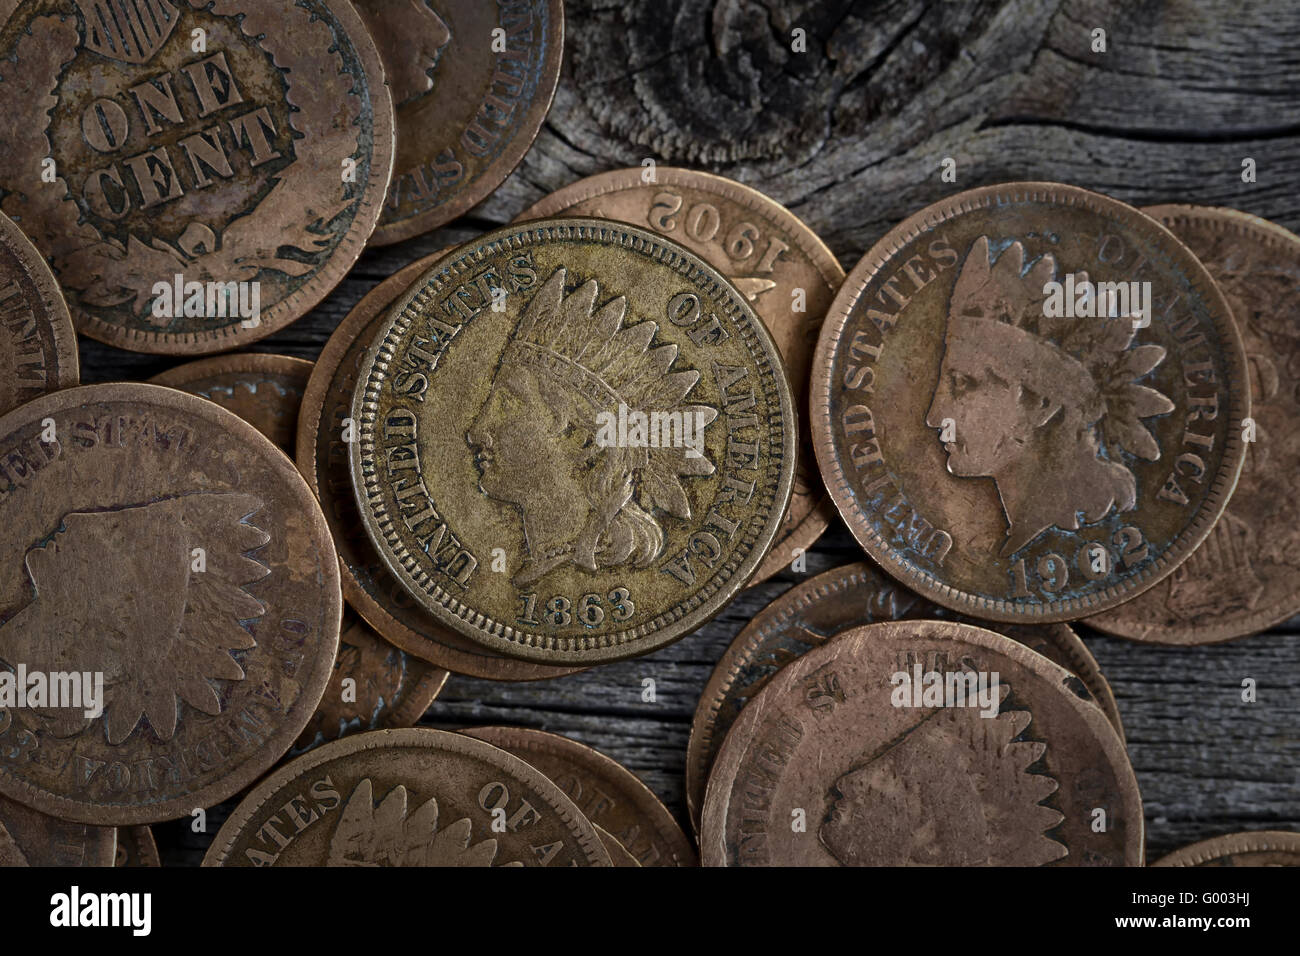 Rare Penny Coins on Wood Stock Photo